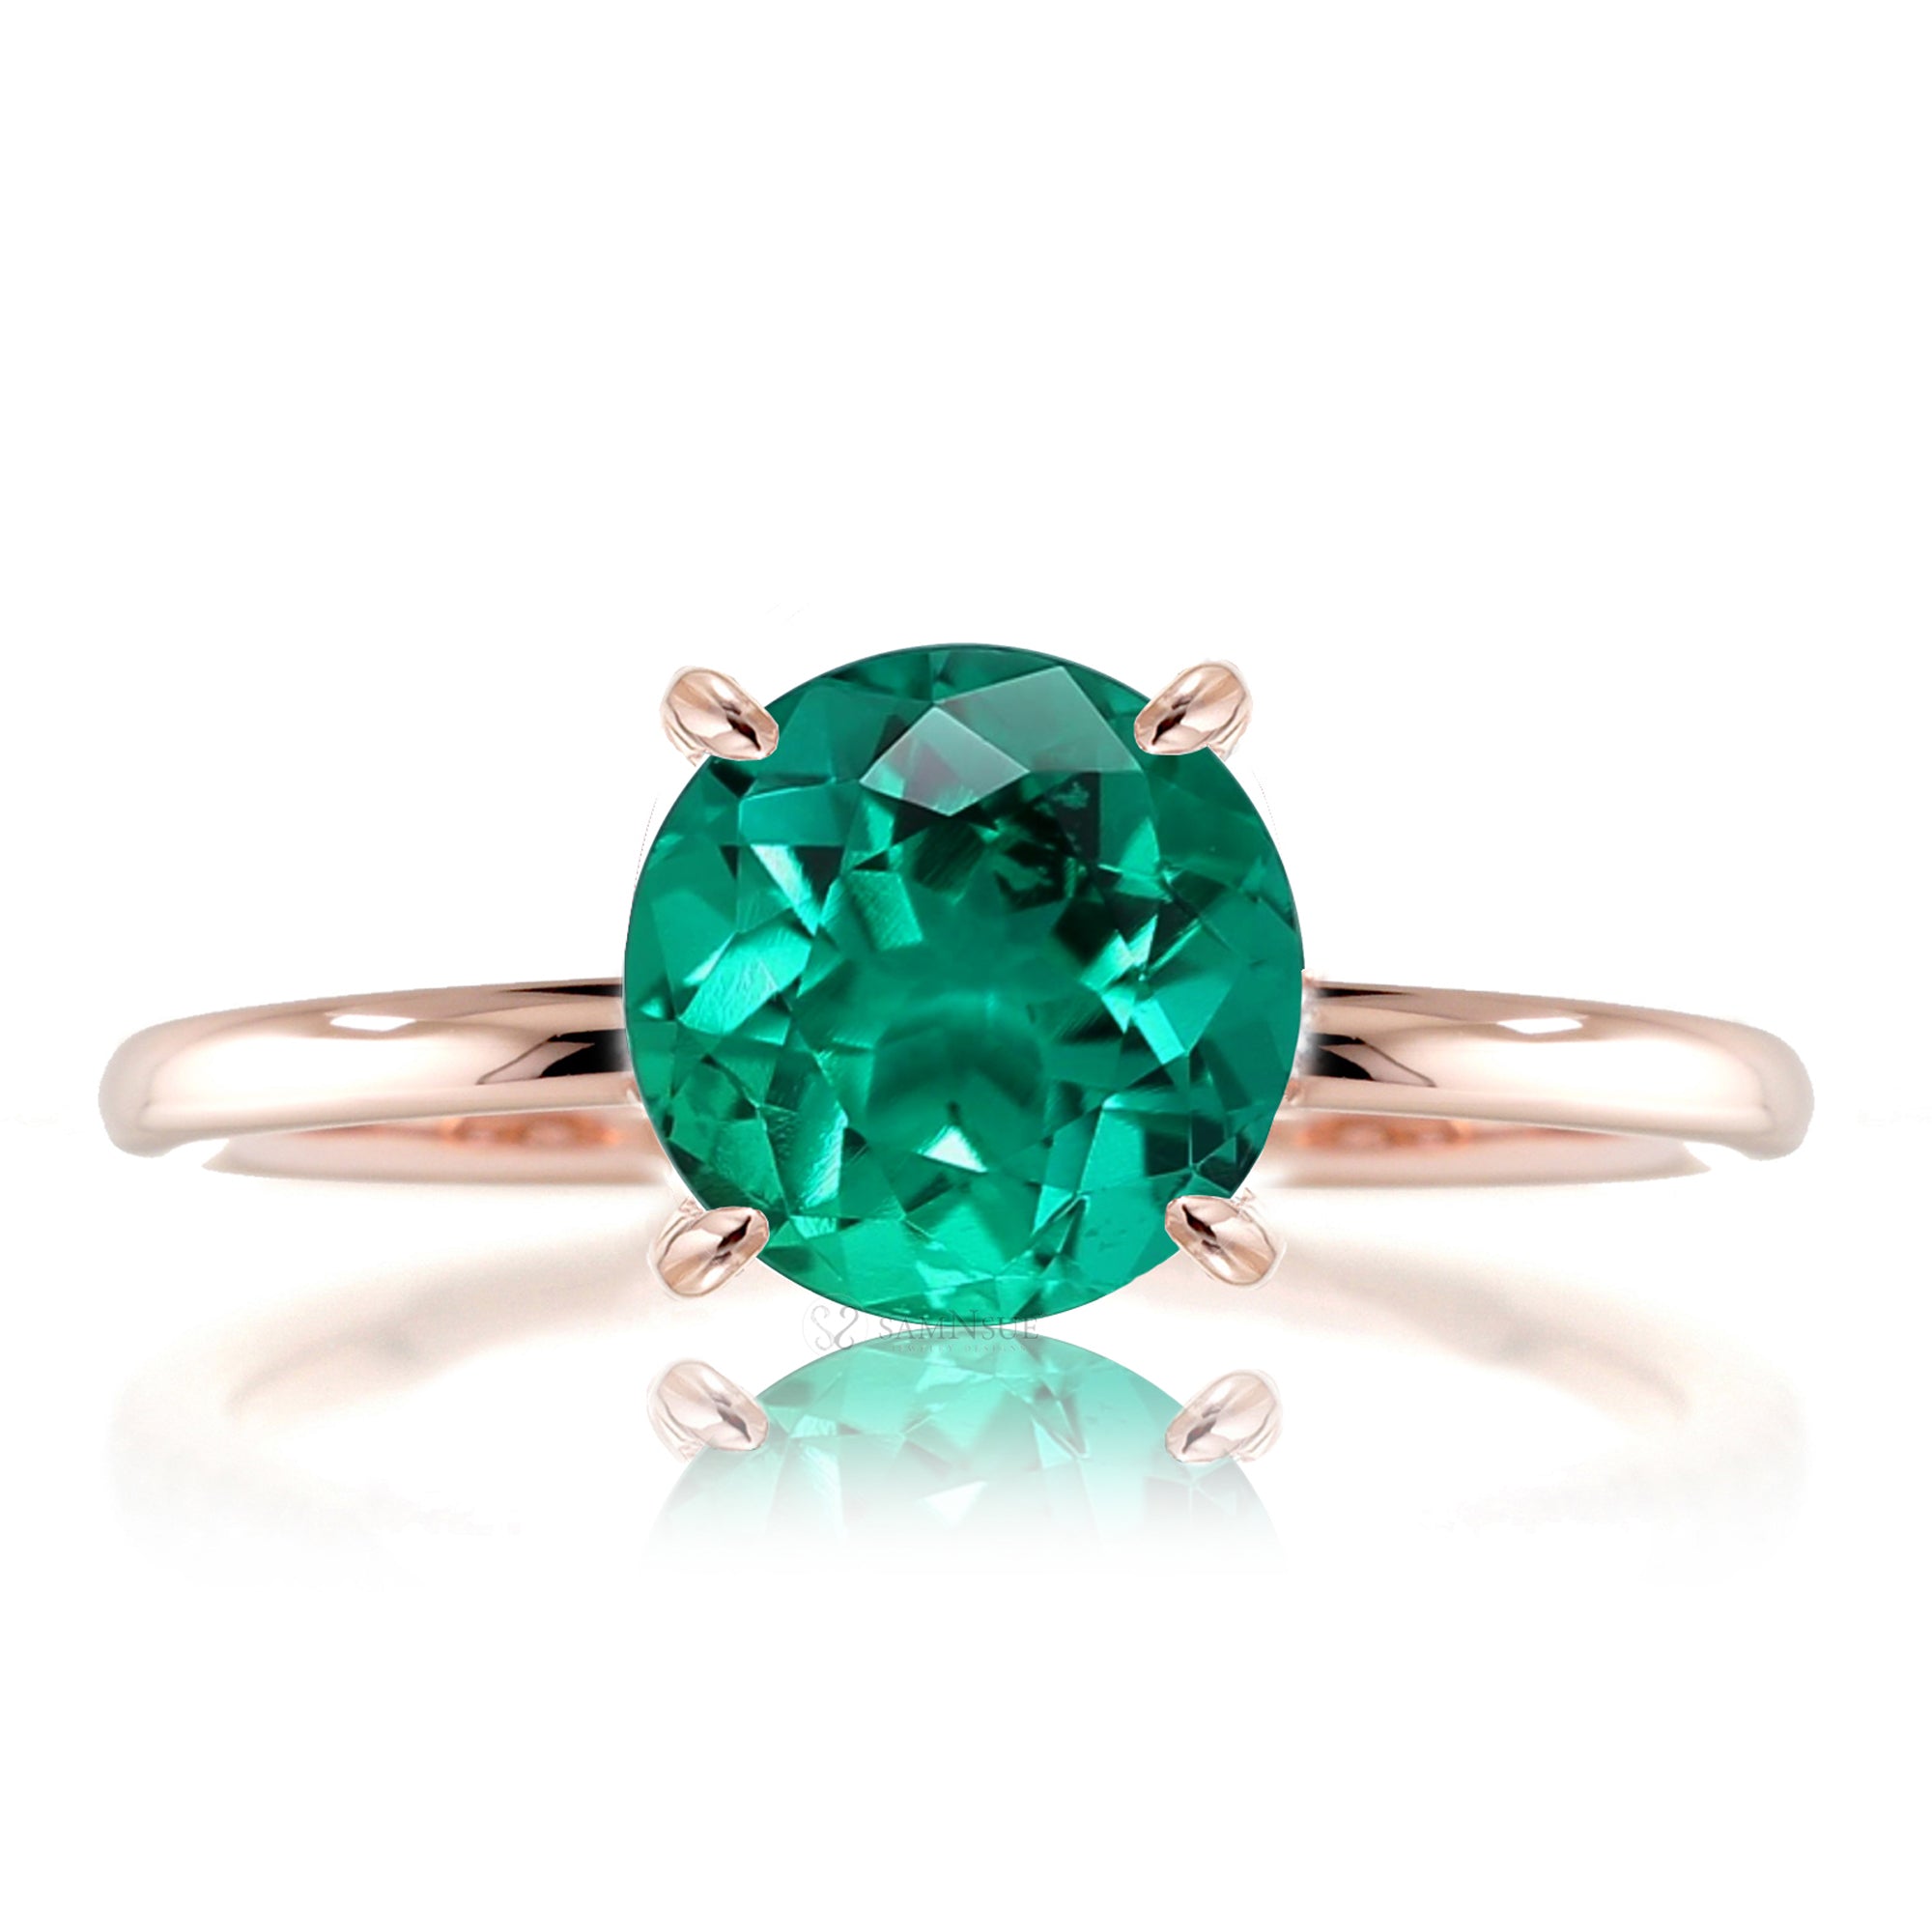 Round green emerald solid band engagement ring rose gold - the Ava